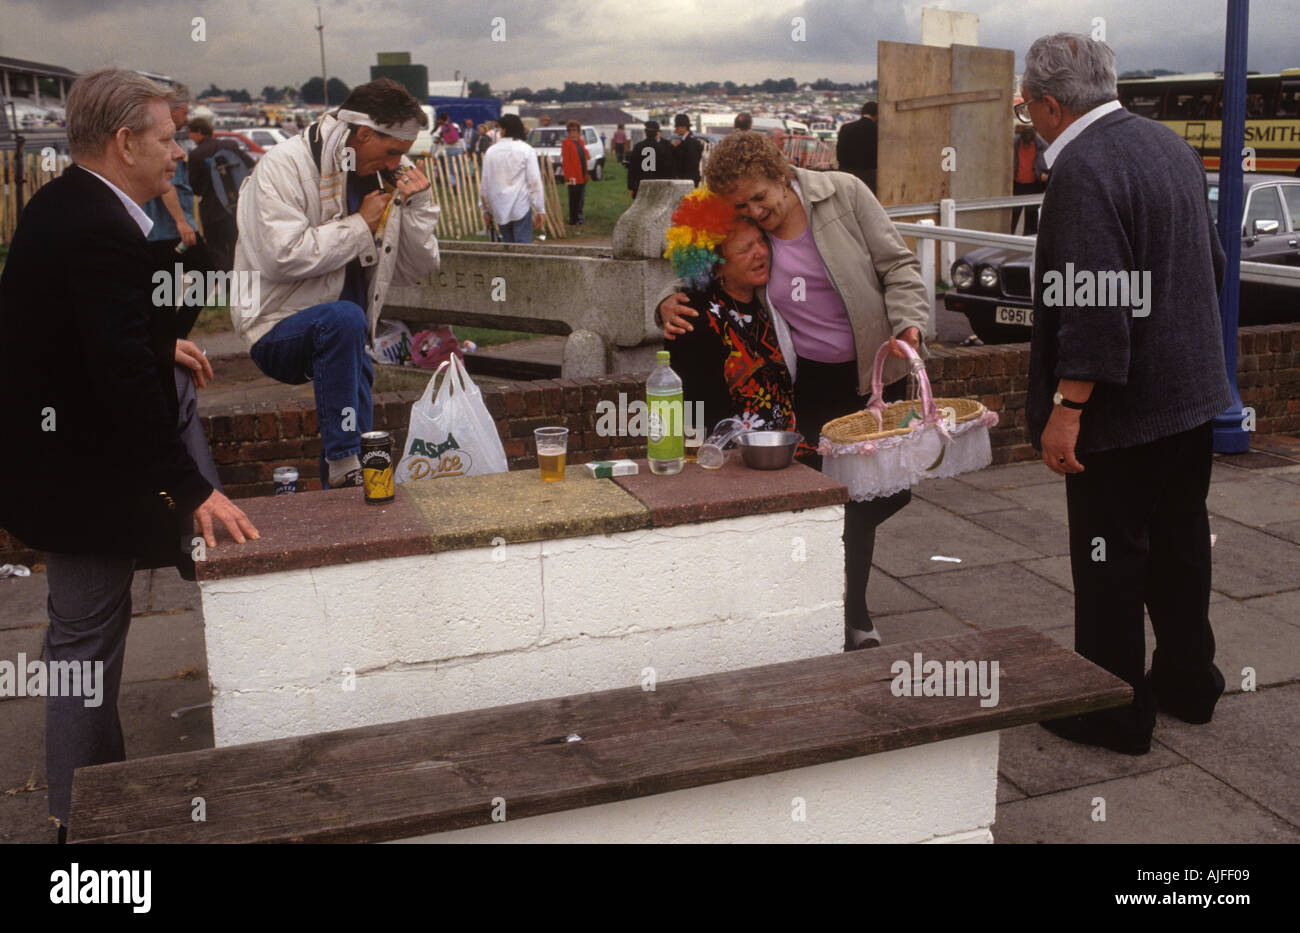 Drunk older woman emotional crying too much to drink, being comforted. Derby Day Horse race Epsom Downs Surrey UK. 1985 1980s UK  HOMER SYKES Stock Photo